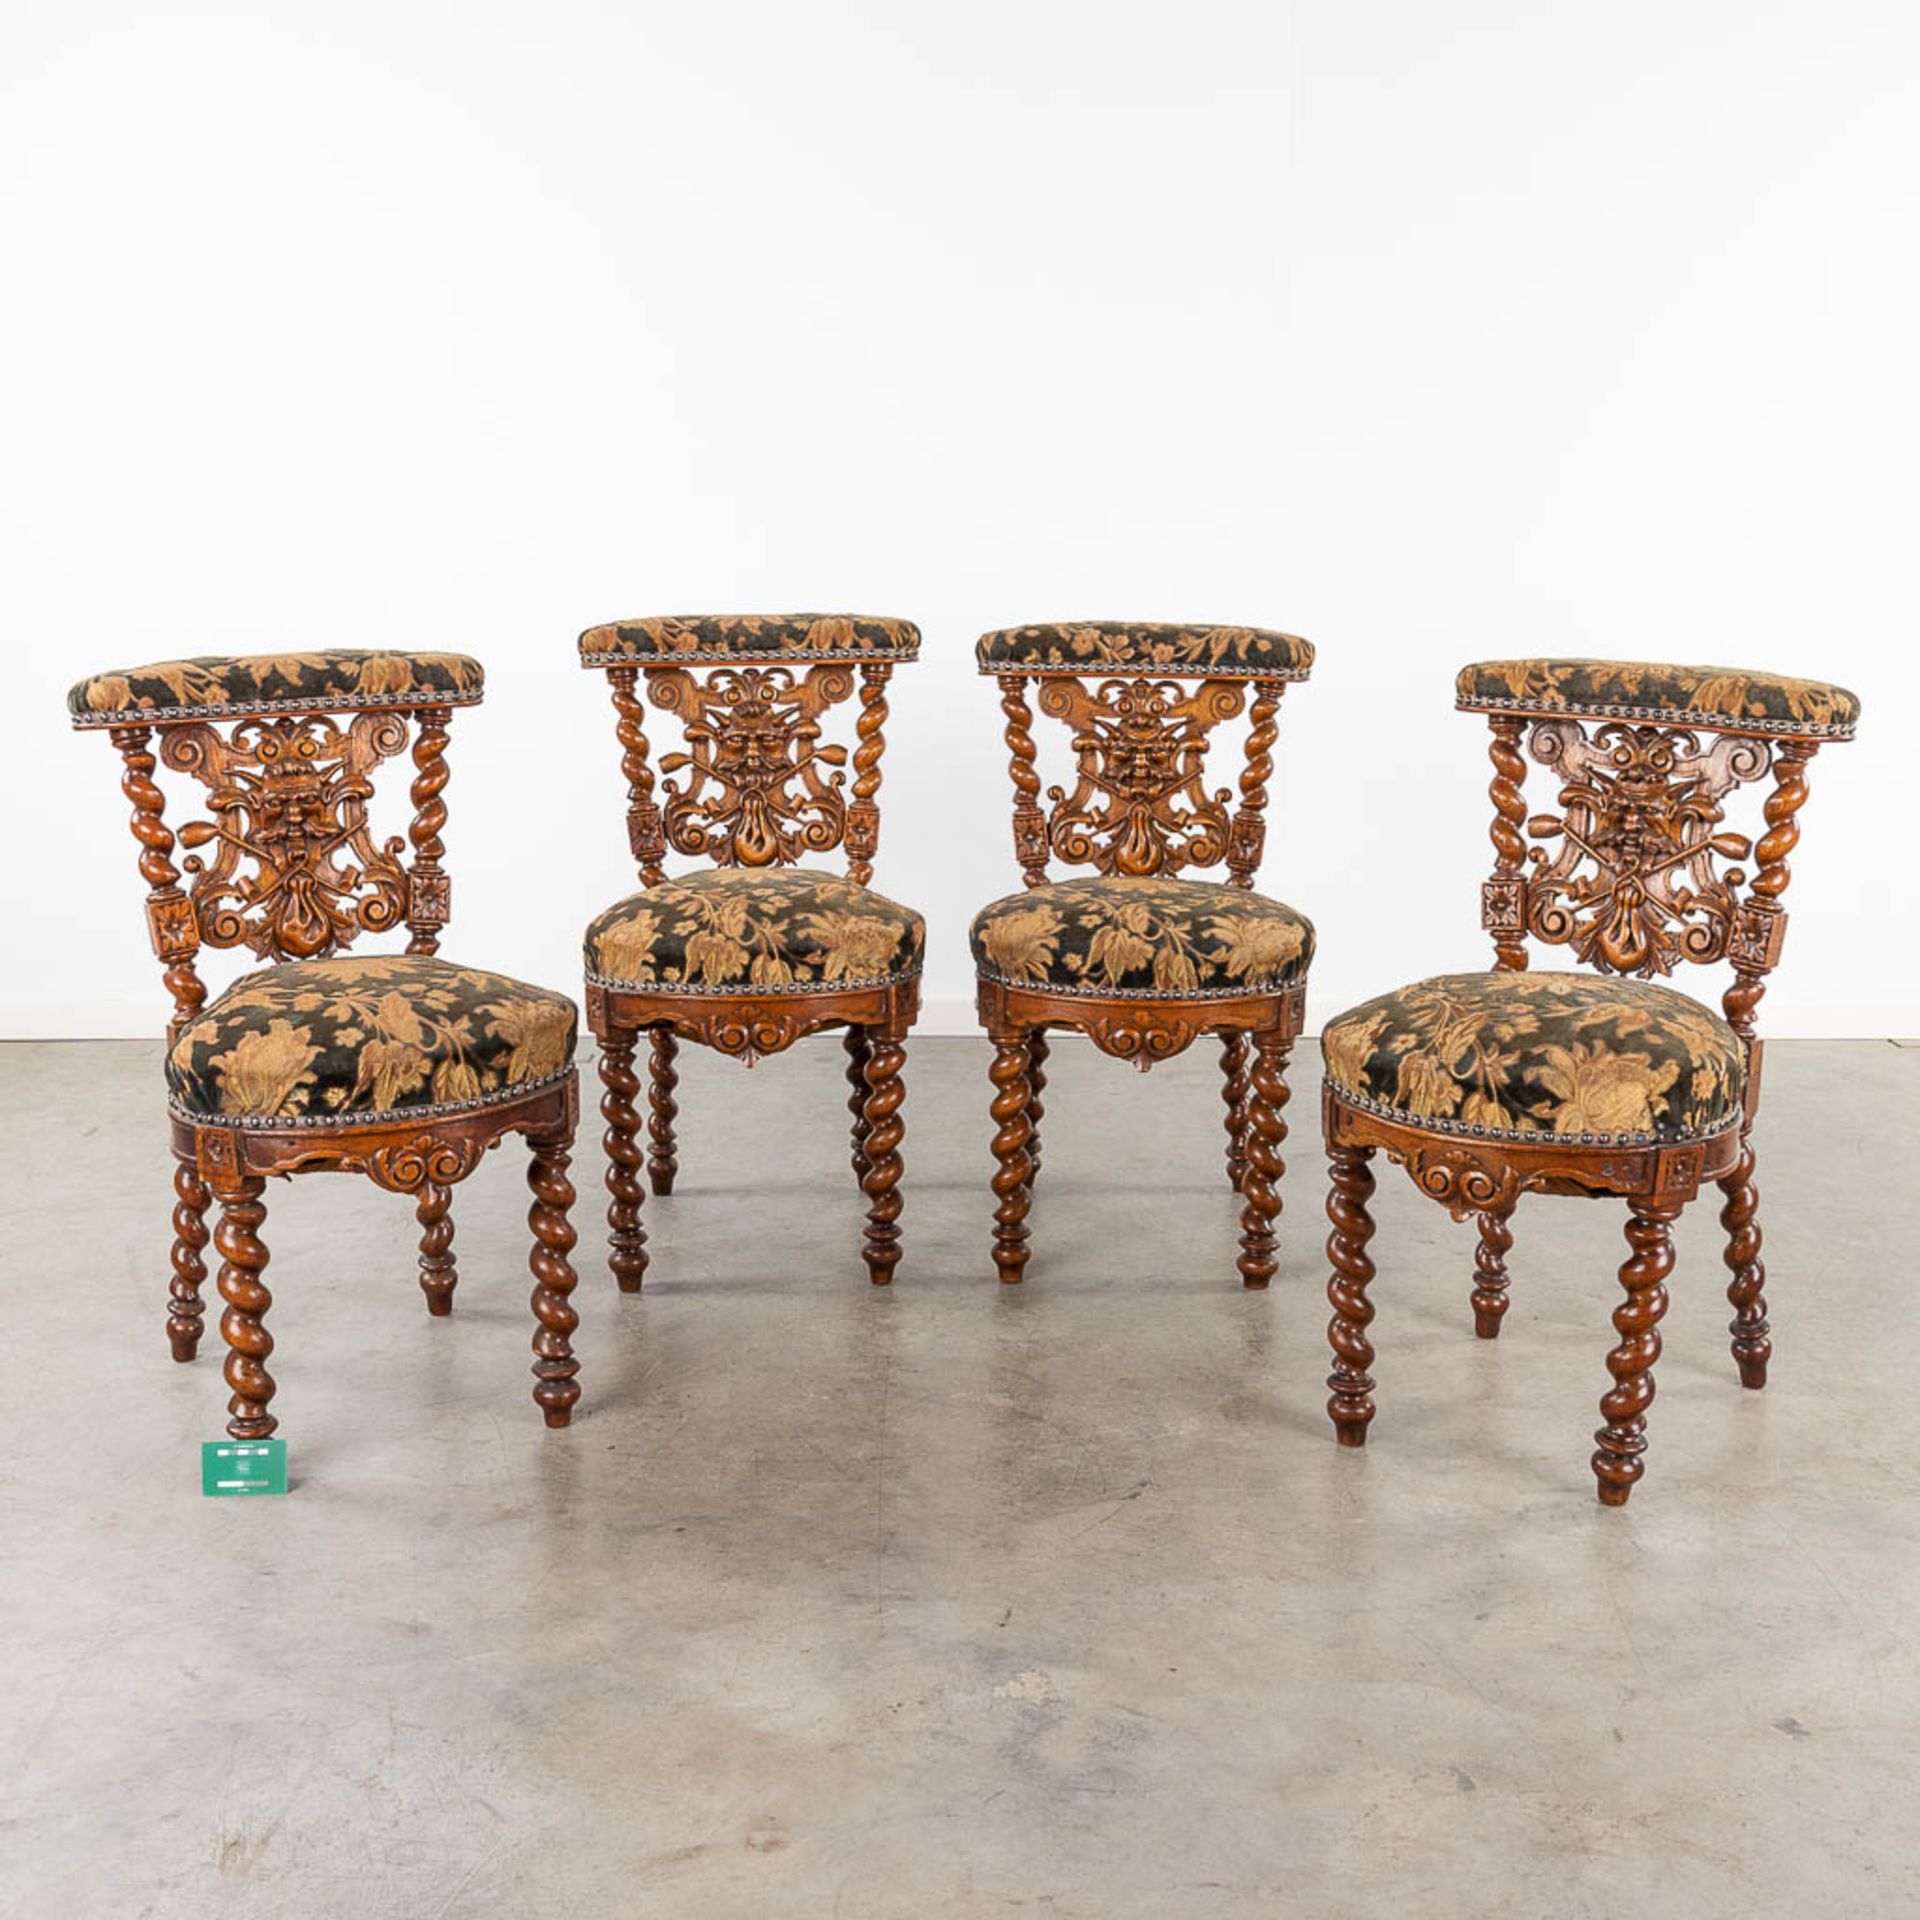 A set of 4 antique wood-sculptured smoker's chairs, oak. Circa 1900. (L:55 x W:44 x H:80 cm) - Image 2 of 15